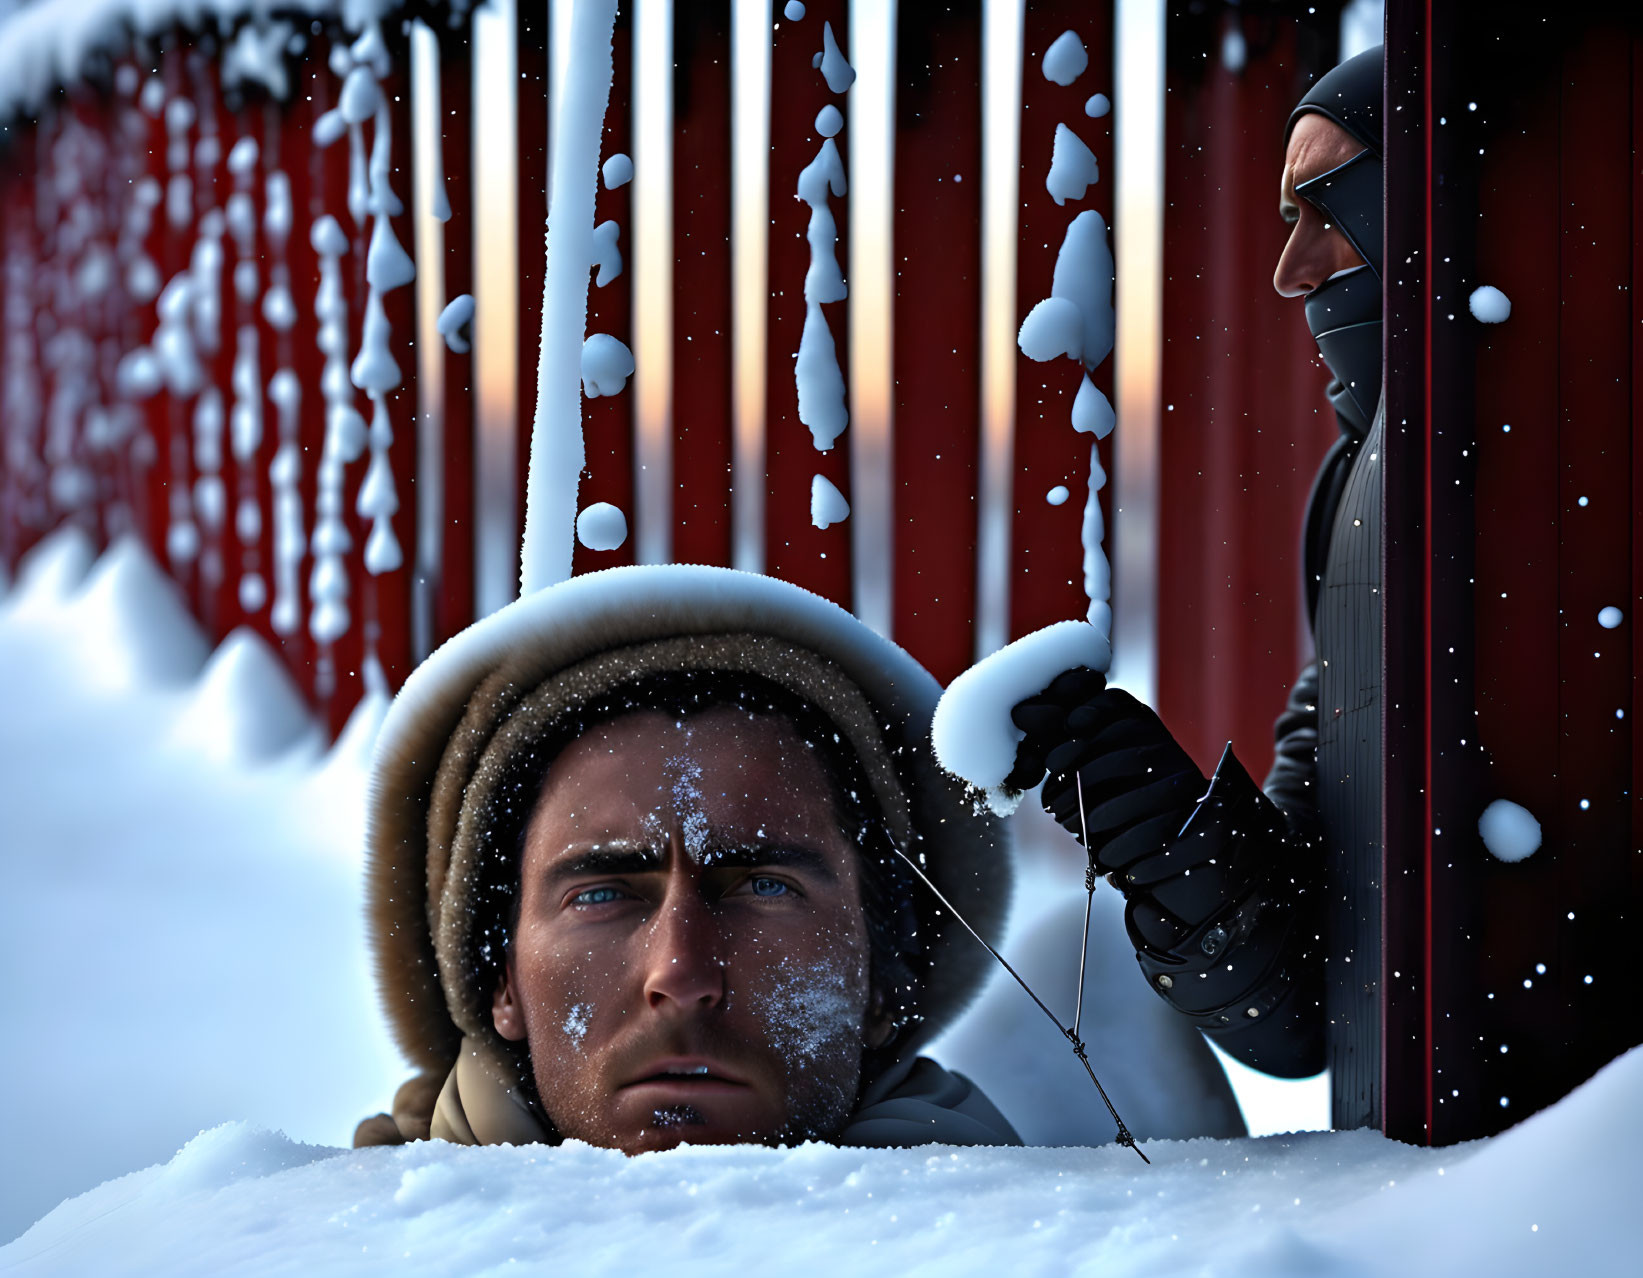 Two individuals in snow: one lying down in fur hat, the other making a snowball behind a